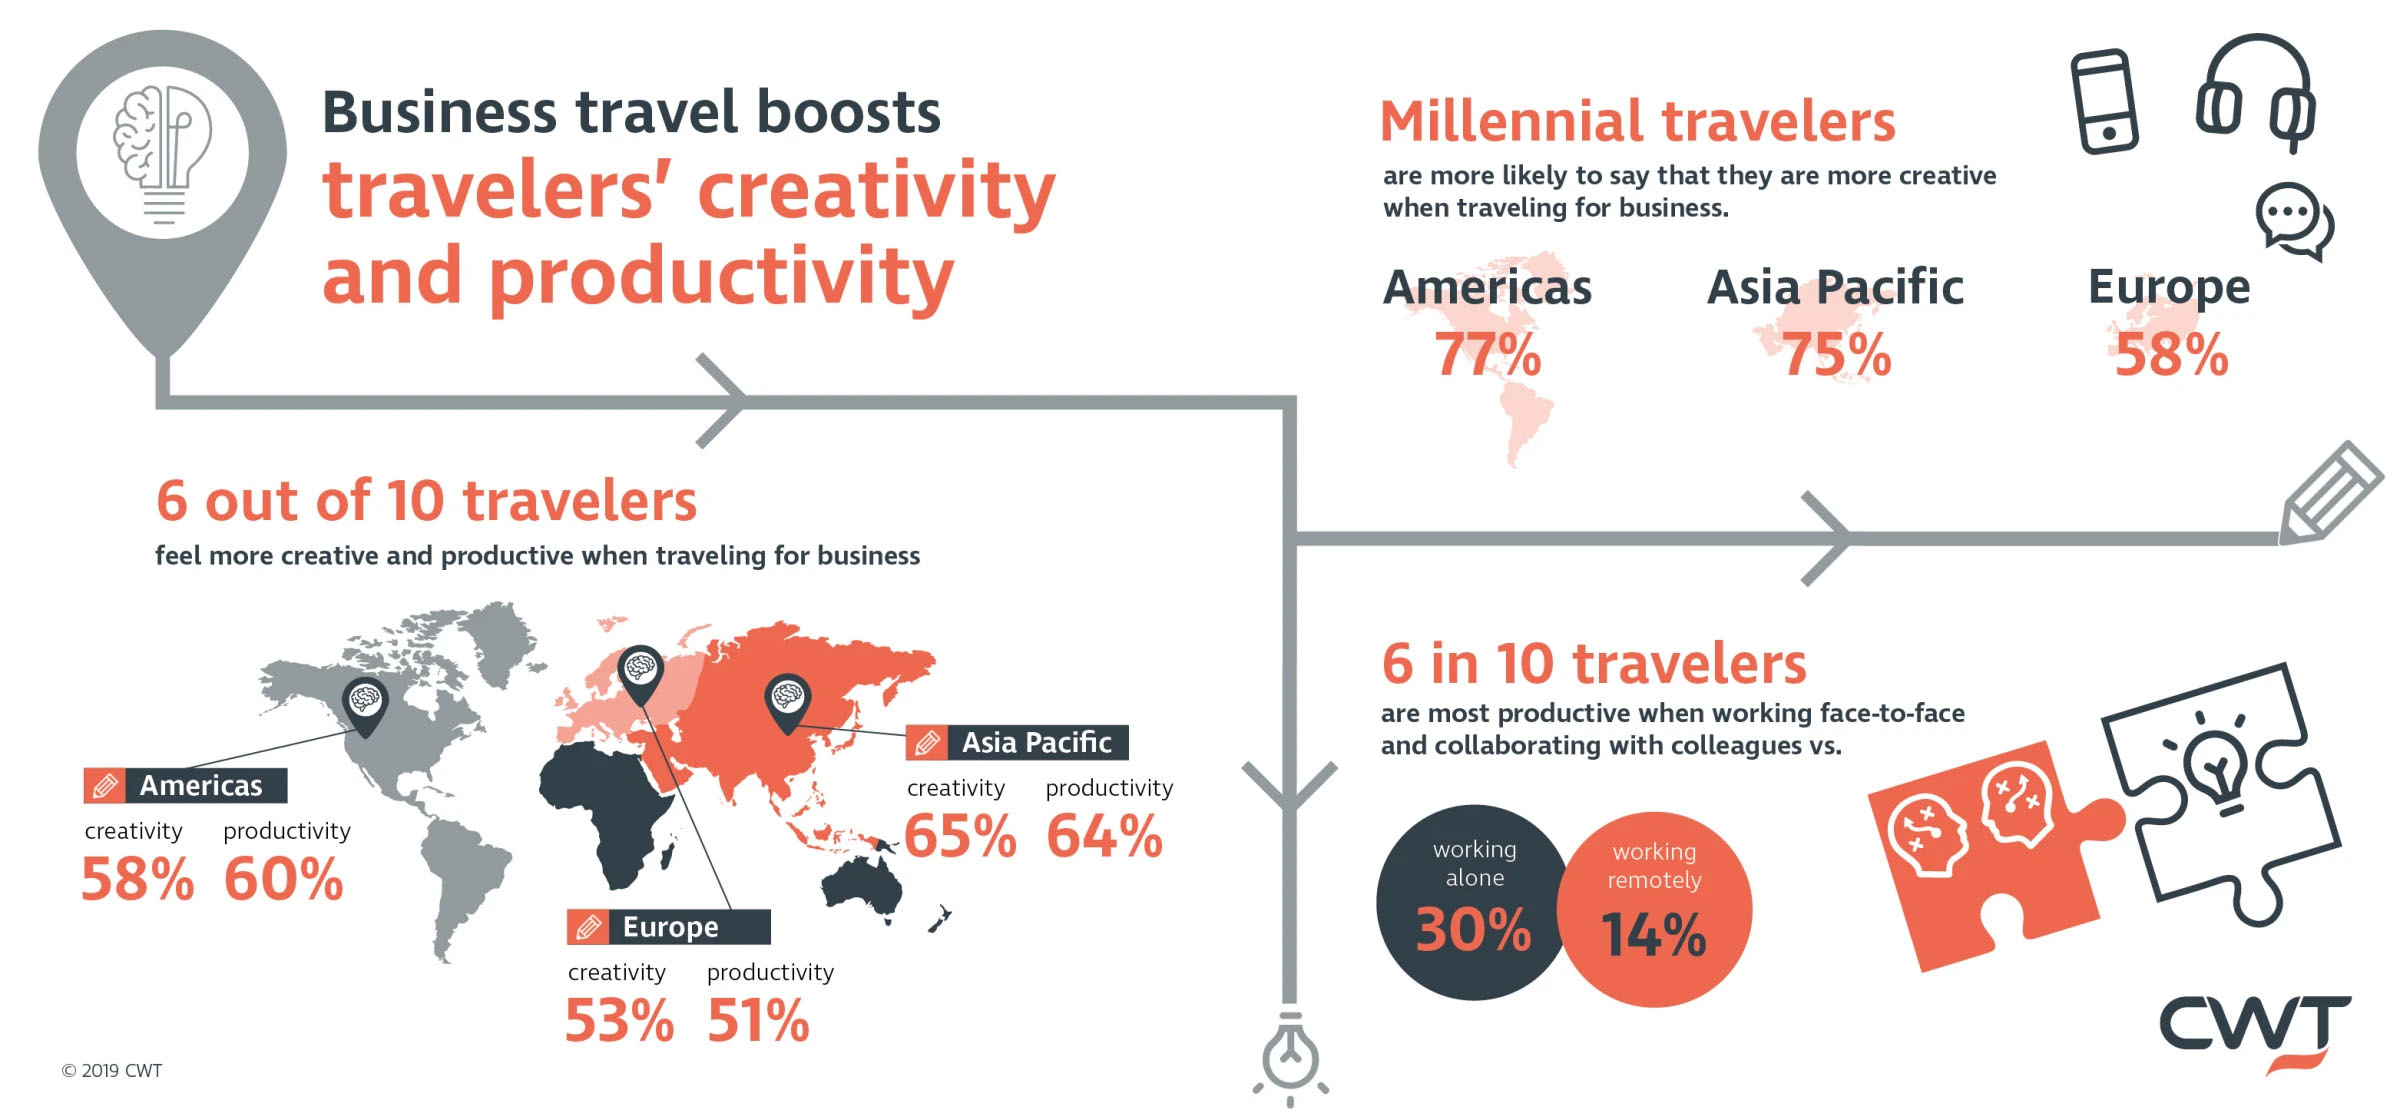 Business Traveler Creativity and Productivity Stimulated During Travel, According to CWT Study